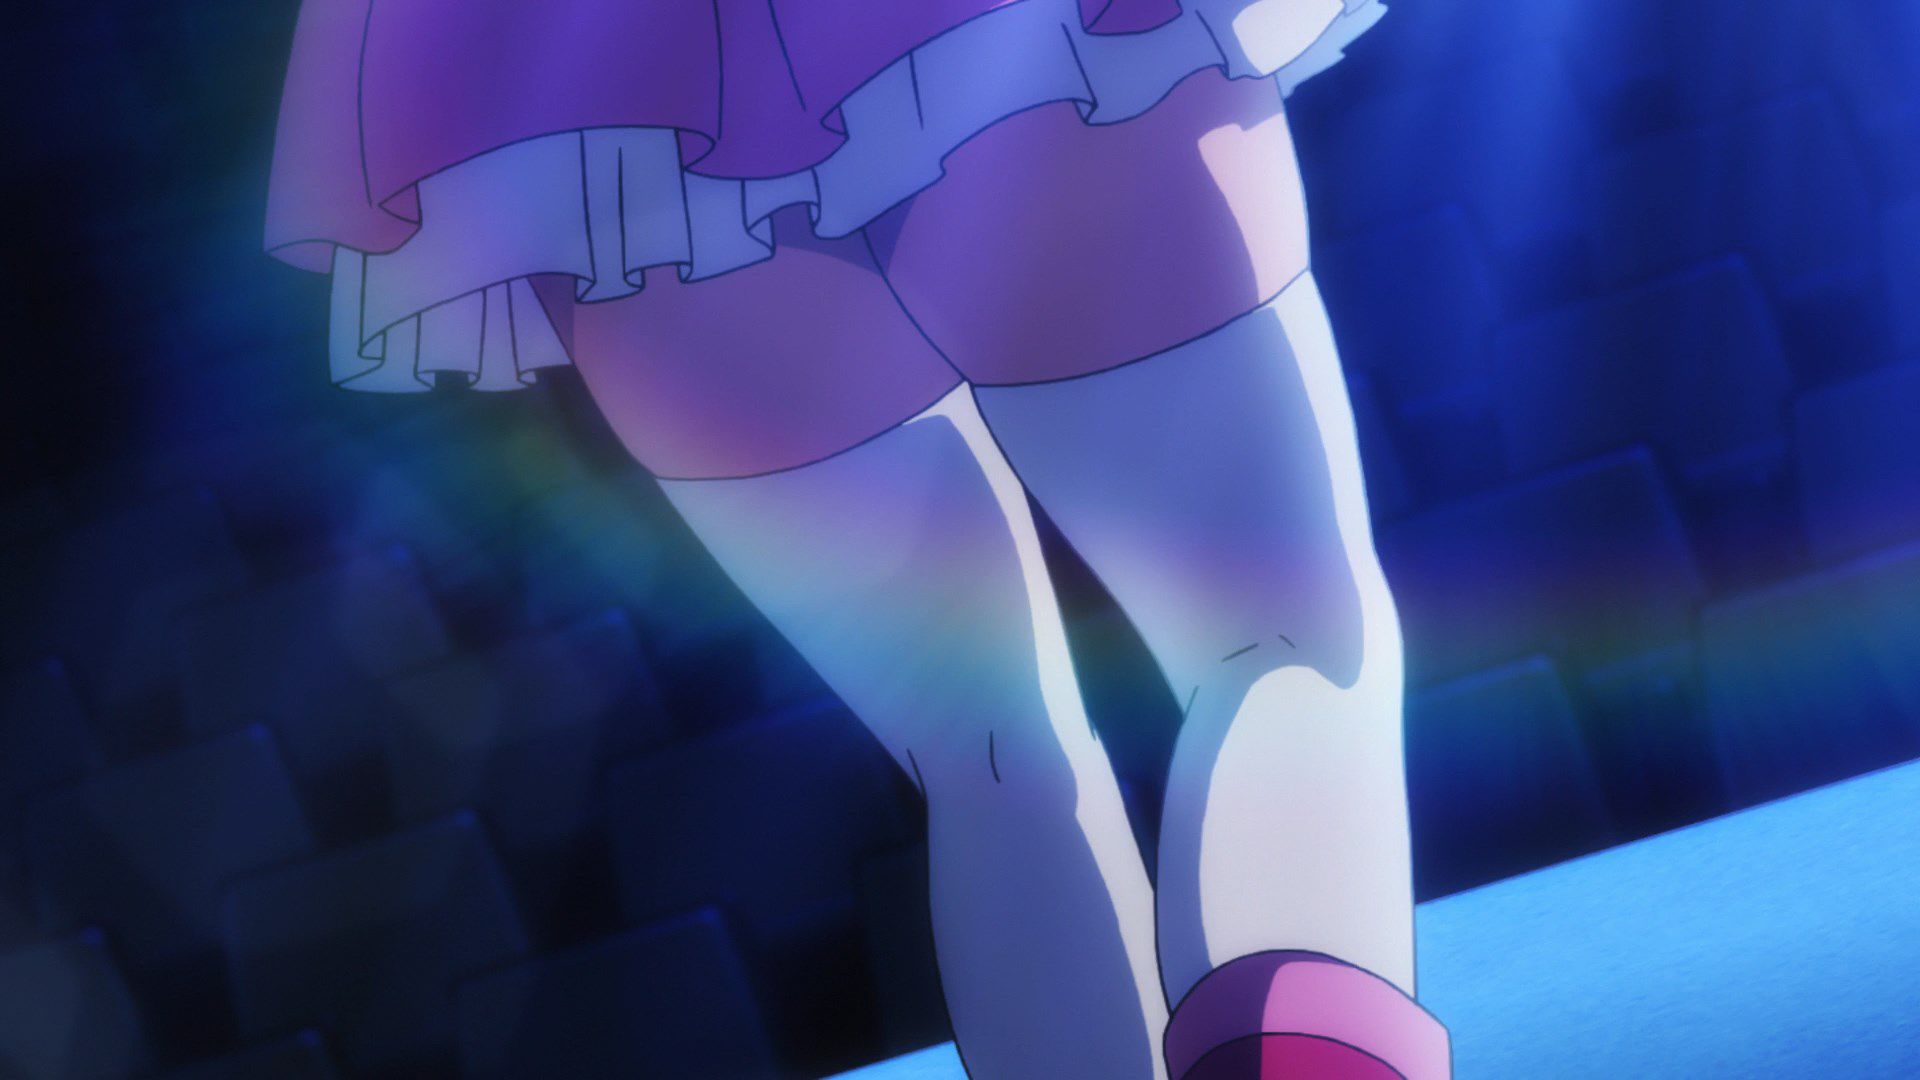 [God images] "love live! ' Μm ' PV's leg is too erotic everyone wakes up to a leg fetish of wwwww 37